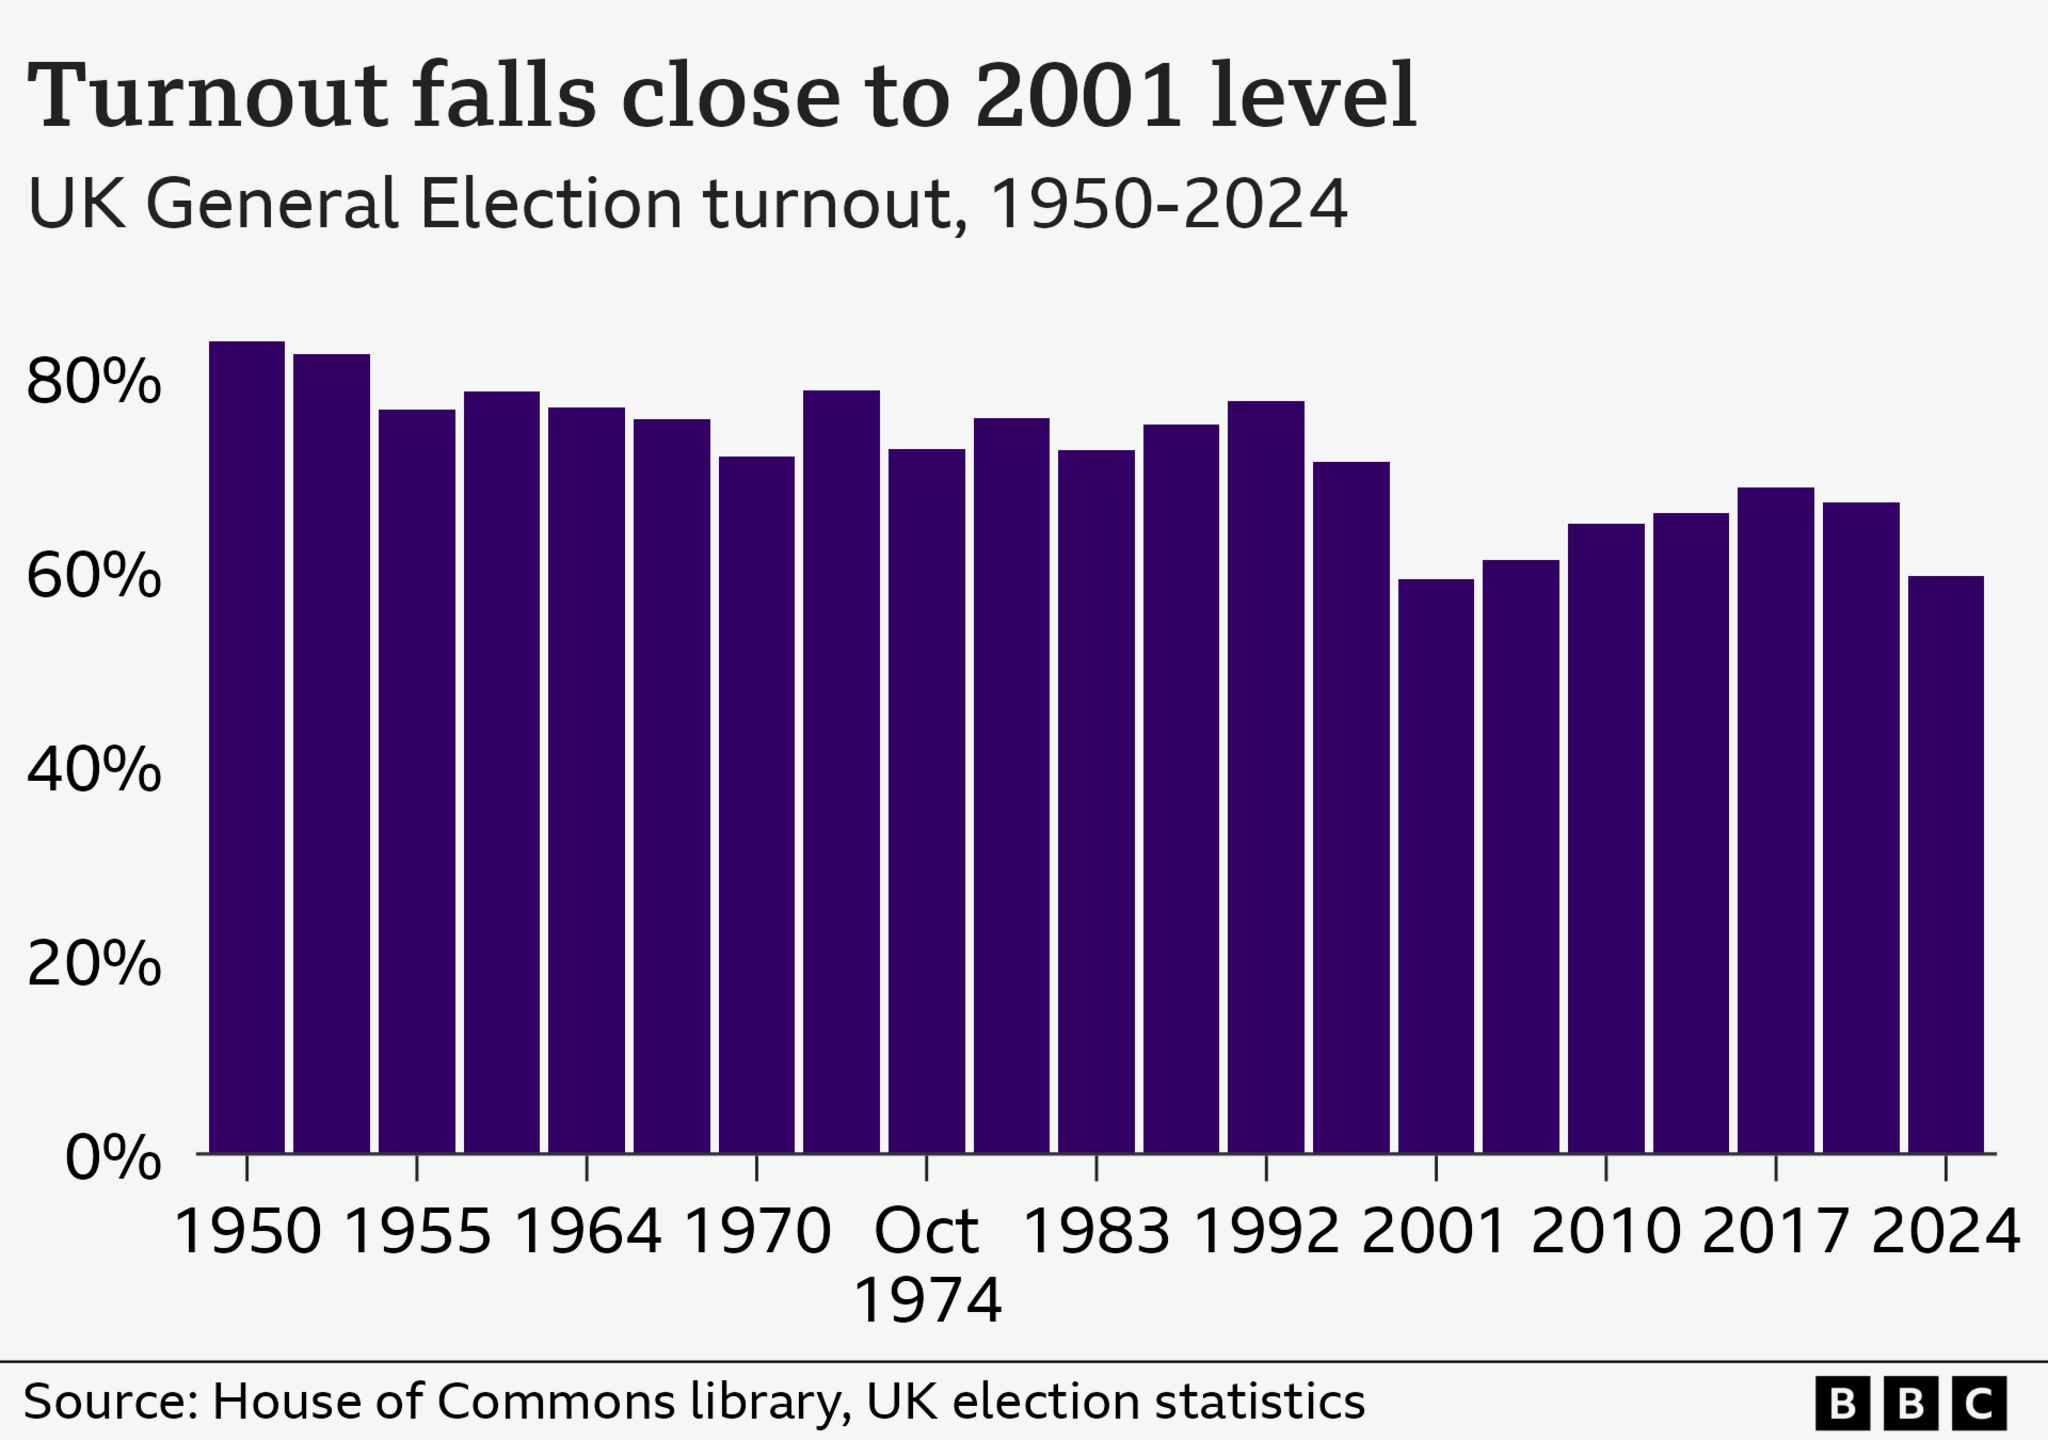 A bar chart showing turnout has fallen close to 2001 level